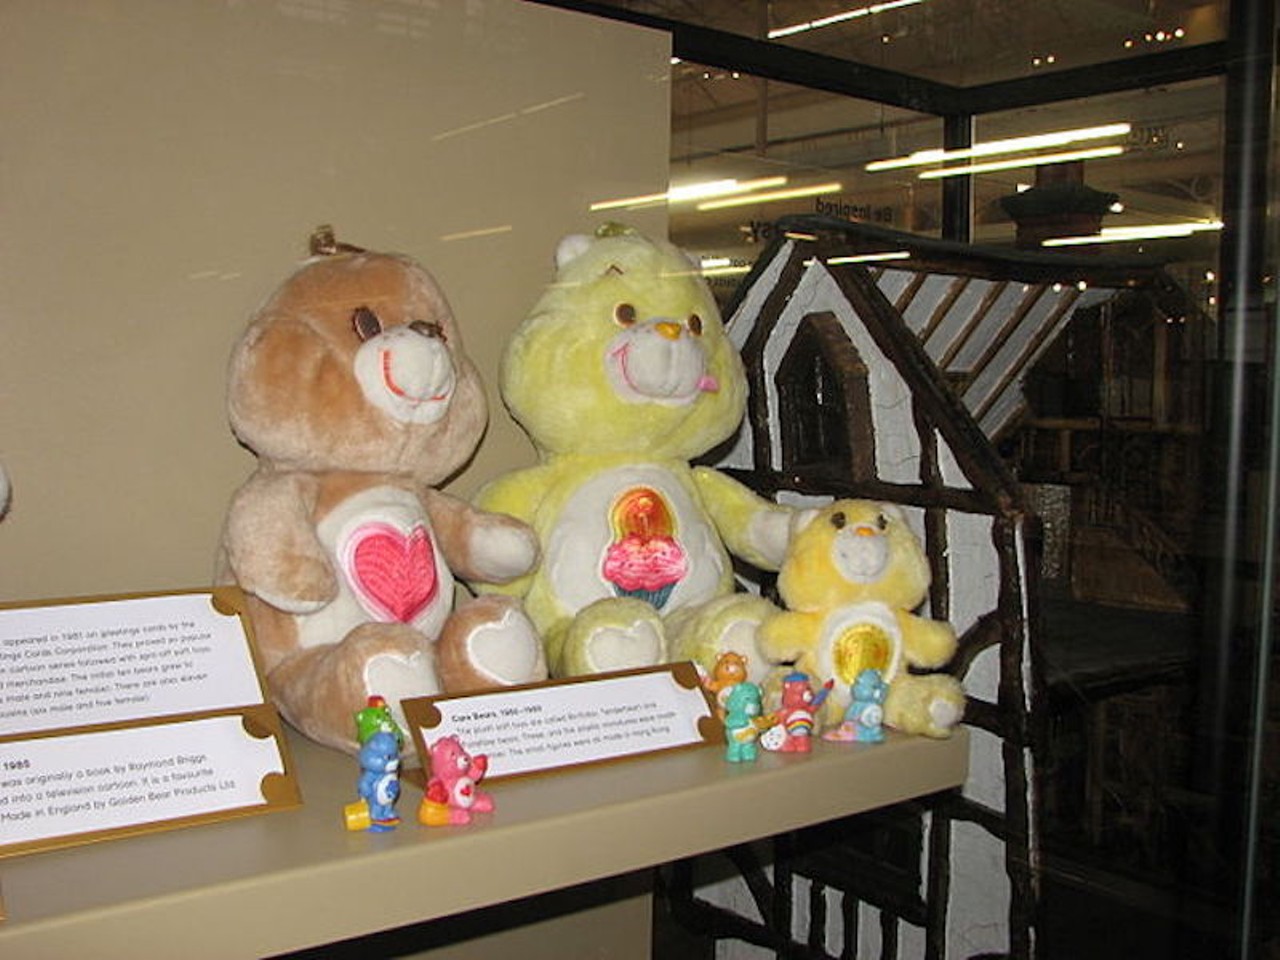 Care Bears debut as plush toys.
The characters were introduced in 1981 in an American Greetings card, and became plush toys in 1983.